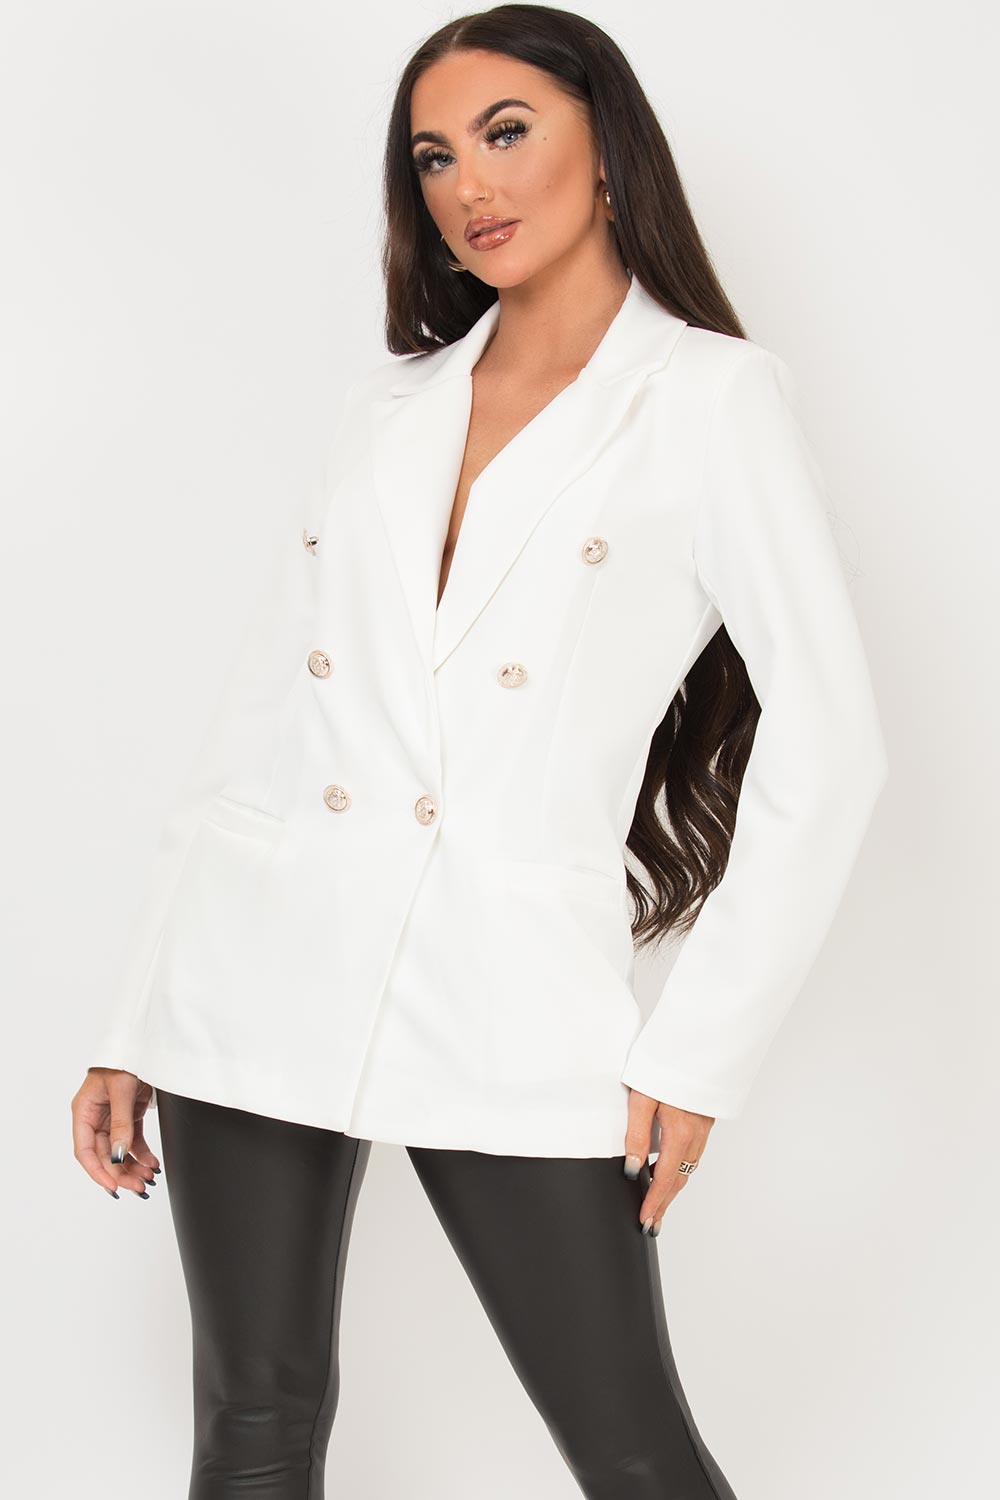 womens white blazer jacket with gold buttons